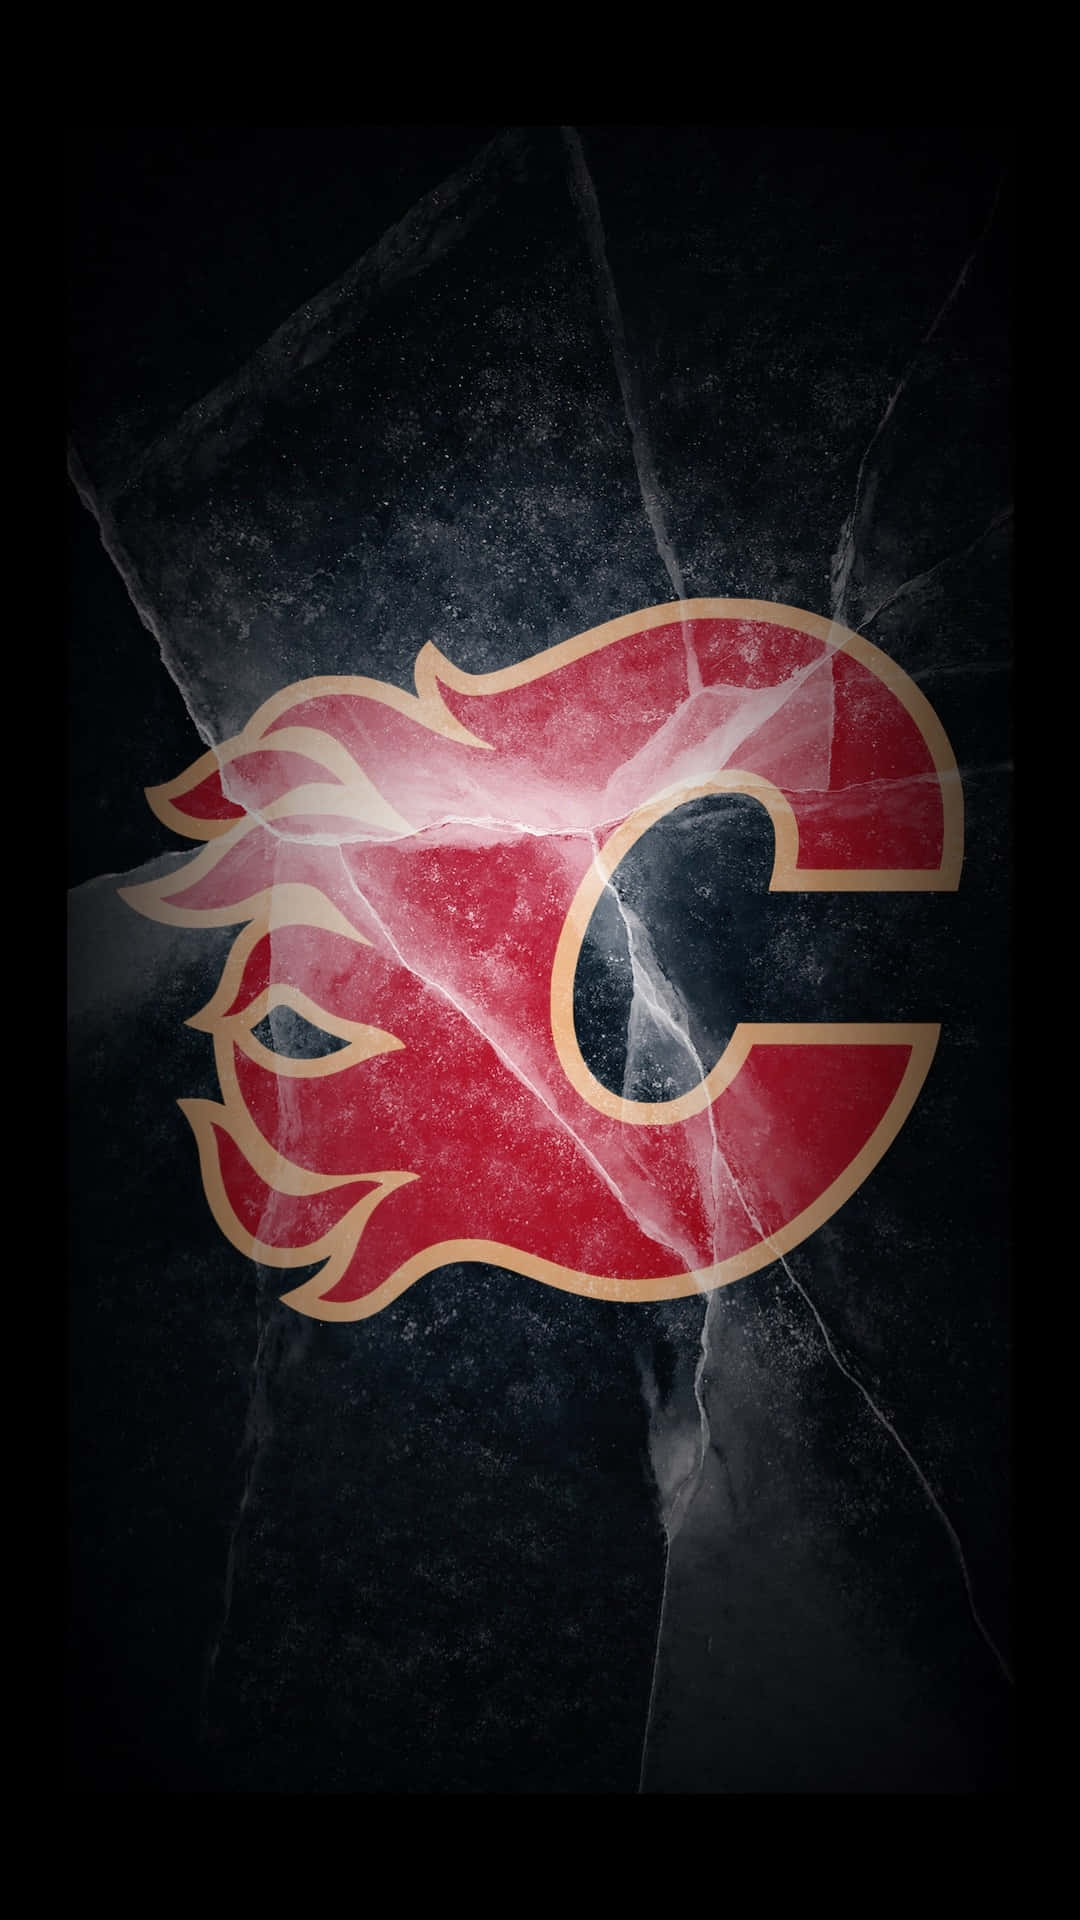 "Heat it Up, Calgary Flames Ready For Action!"